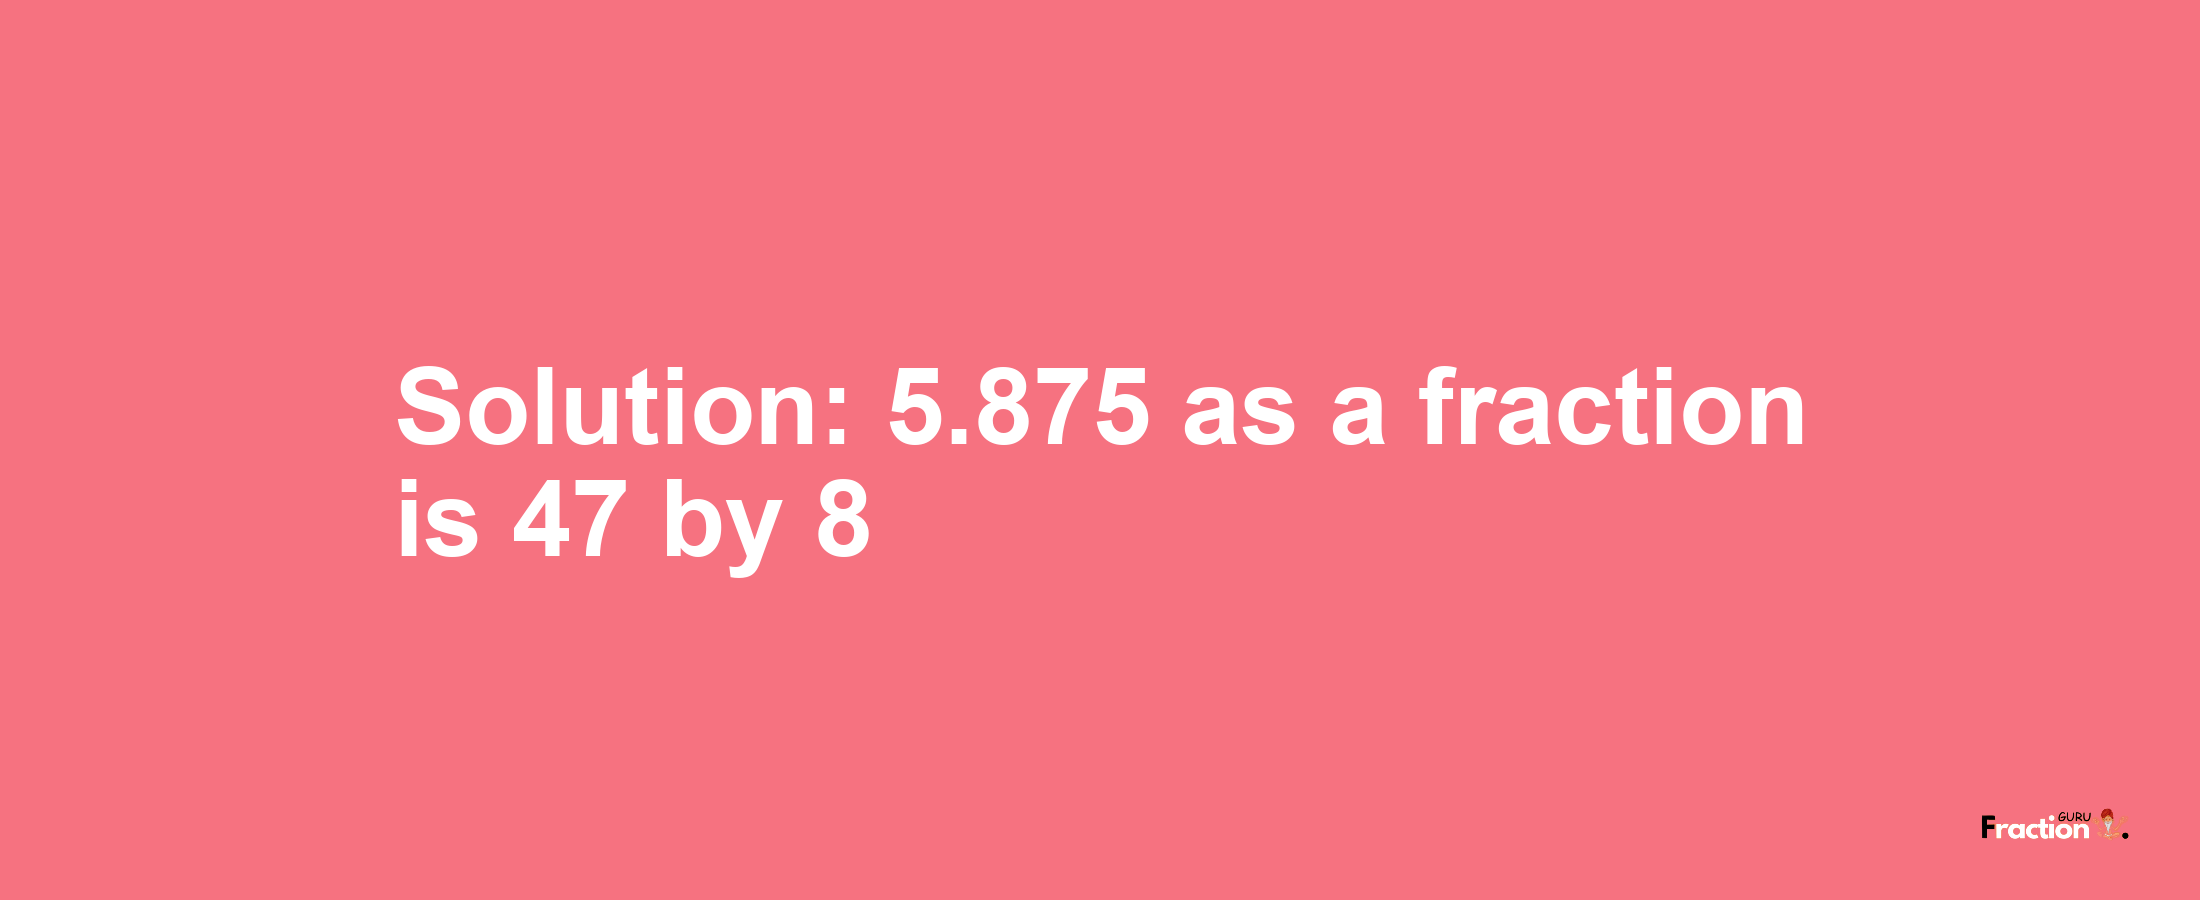 Solution:5.875 as a fraction is 47/8